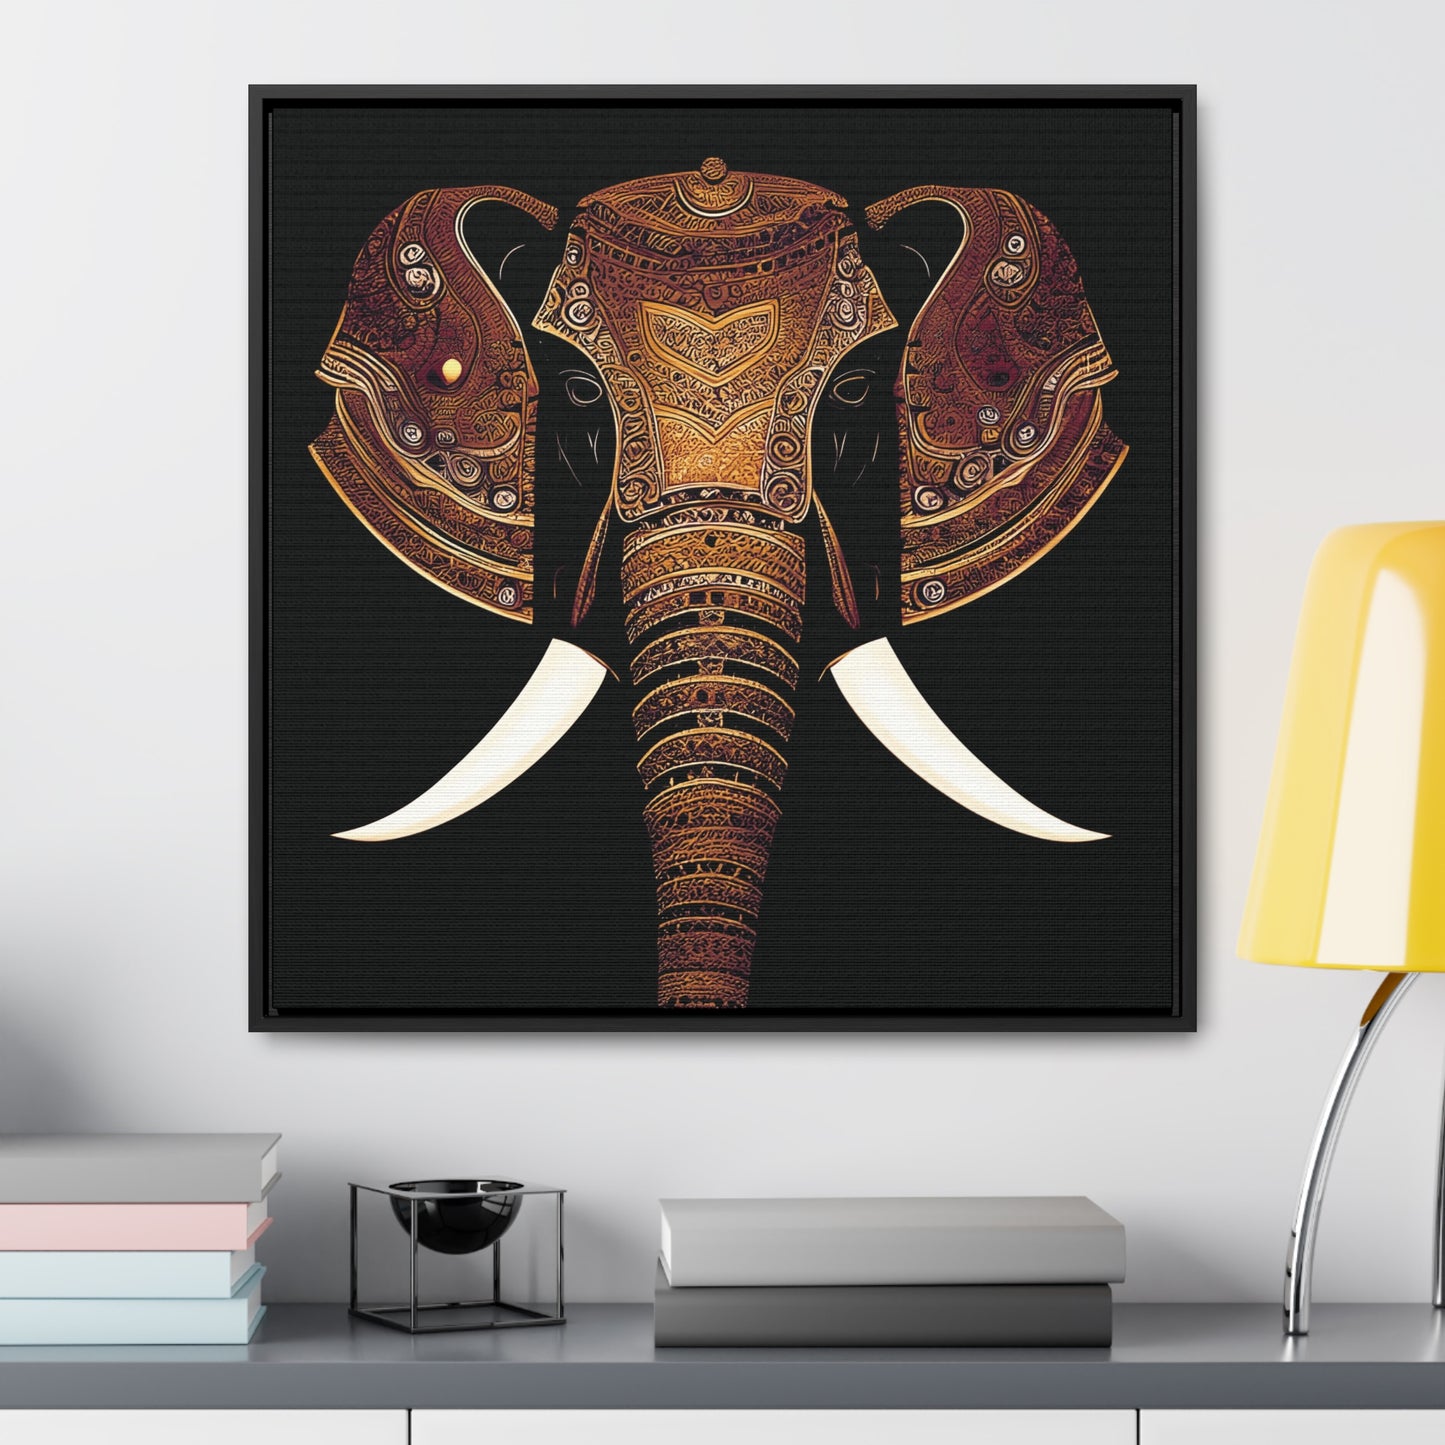 Indian Elephant Head With Parade Colors on Black Background Print on Canvas in a Floating Frame 16x16 